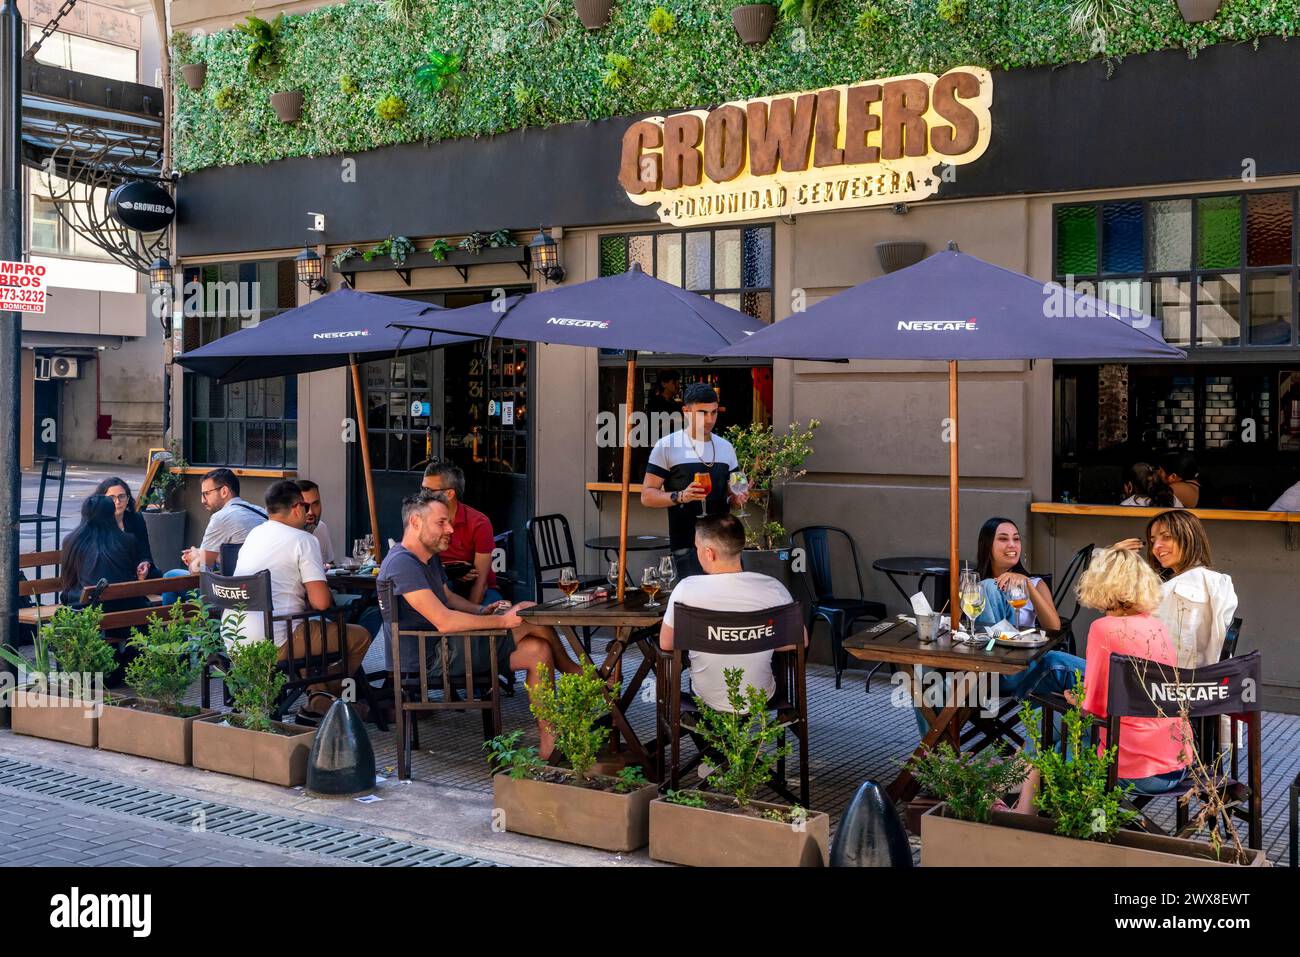 Young People Sitting Outside Growlers Pub/Bar, Buenos Aires, Argentina. Stock Photo